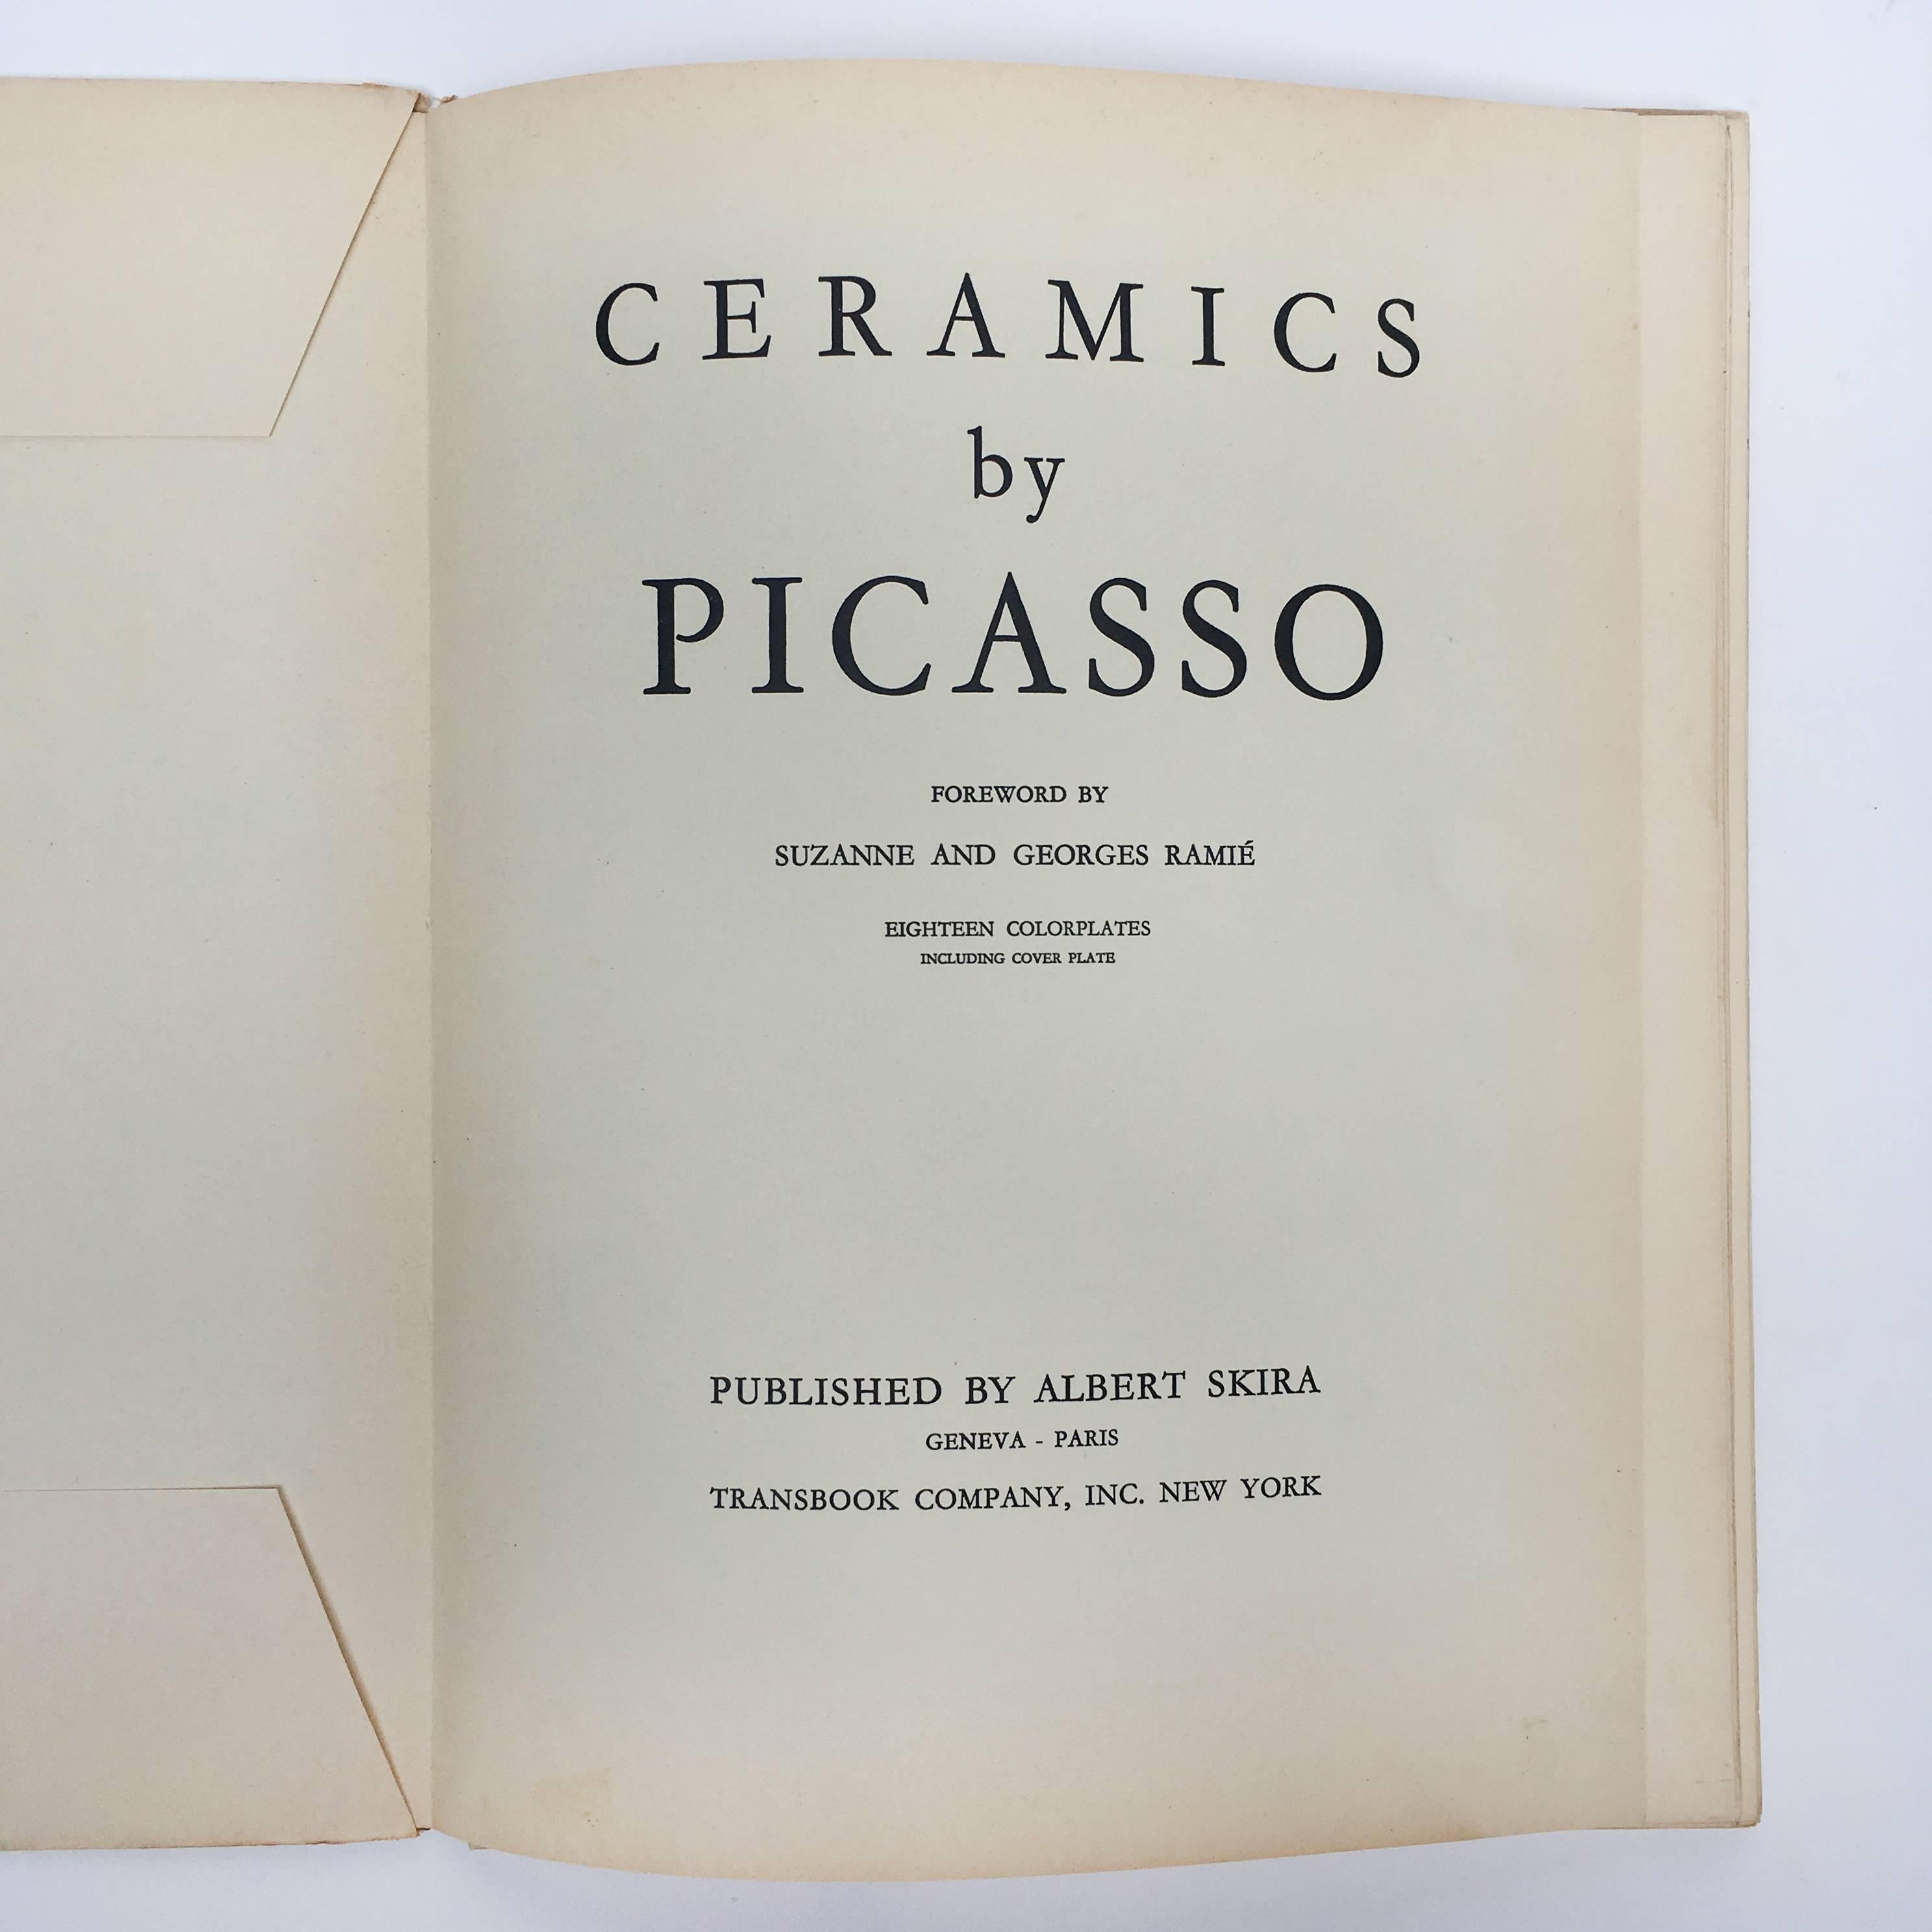 First edition, published by Albert Skira, 1950.

This is a beautiful un-paginated portfolio of all 18 tipped-in photographs of Picasso ceramics, 17 inside and one on the cover. Each of these prints are cut to the shape of the ceramic and have a